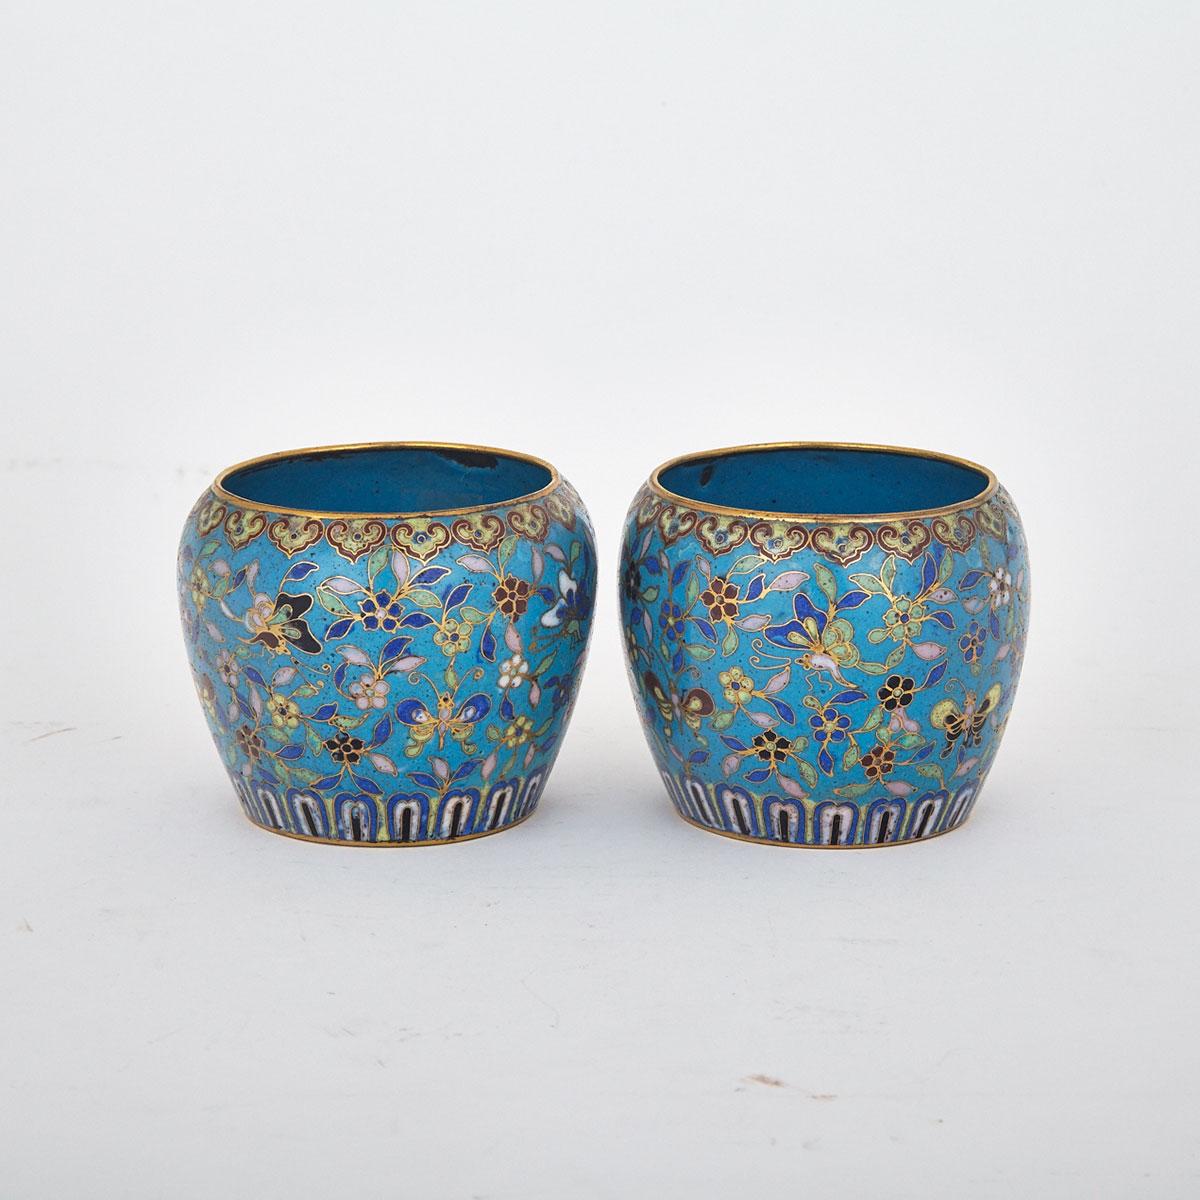 Pair of Blue Ground Cloisonné Enamel Cups, China